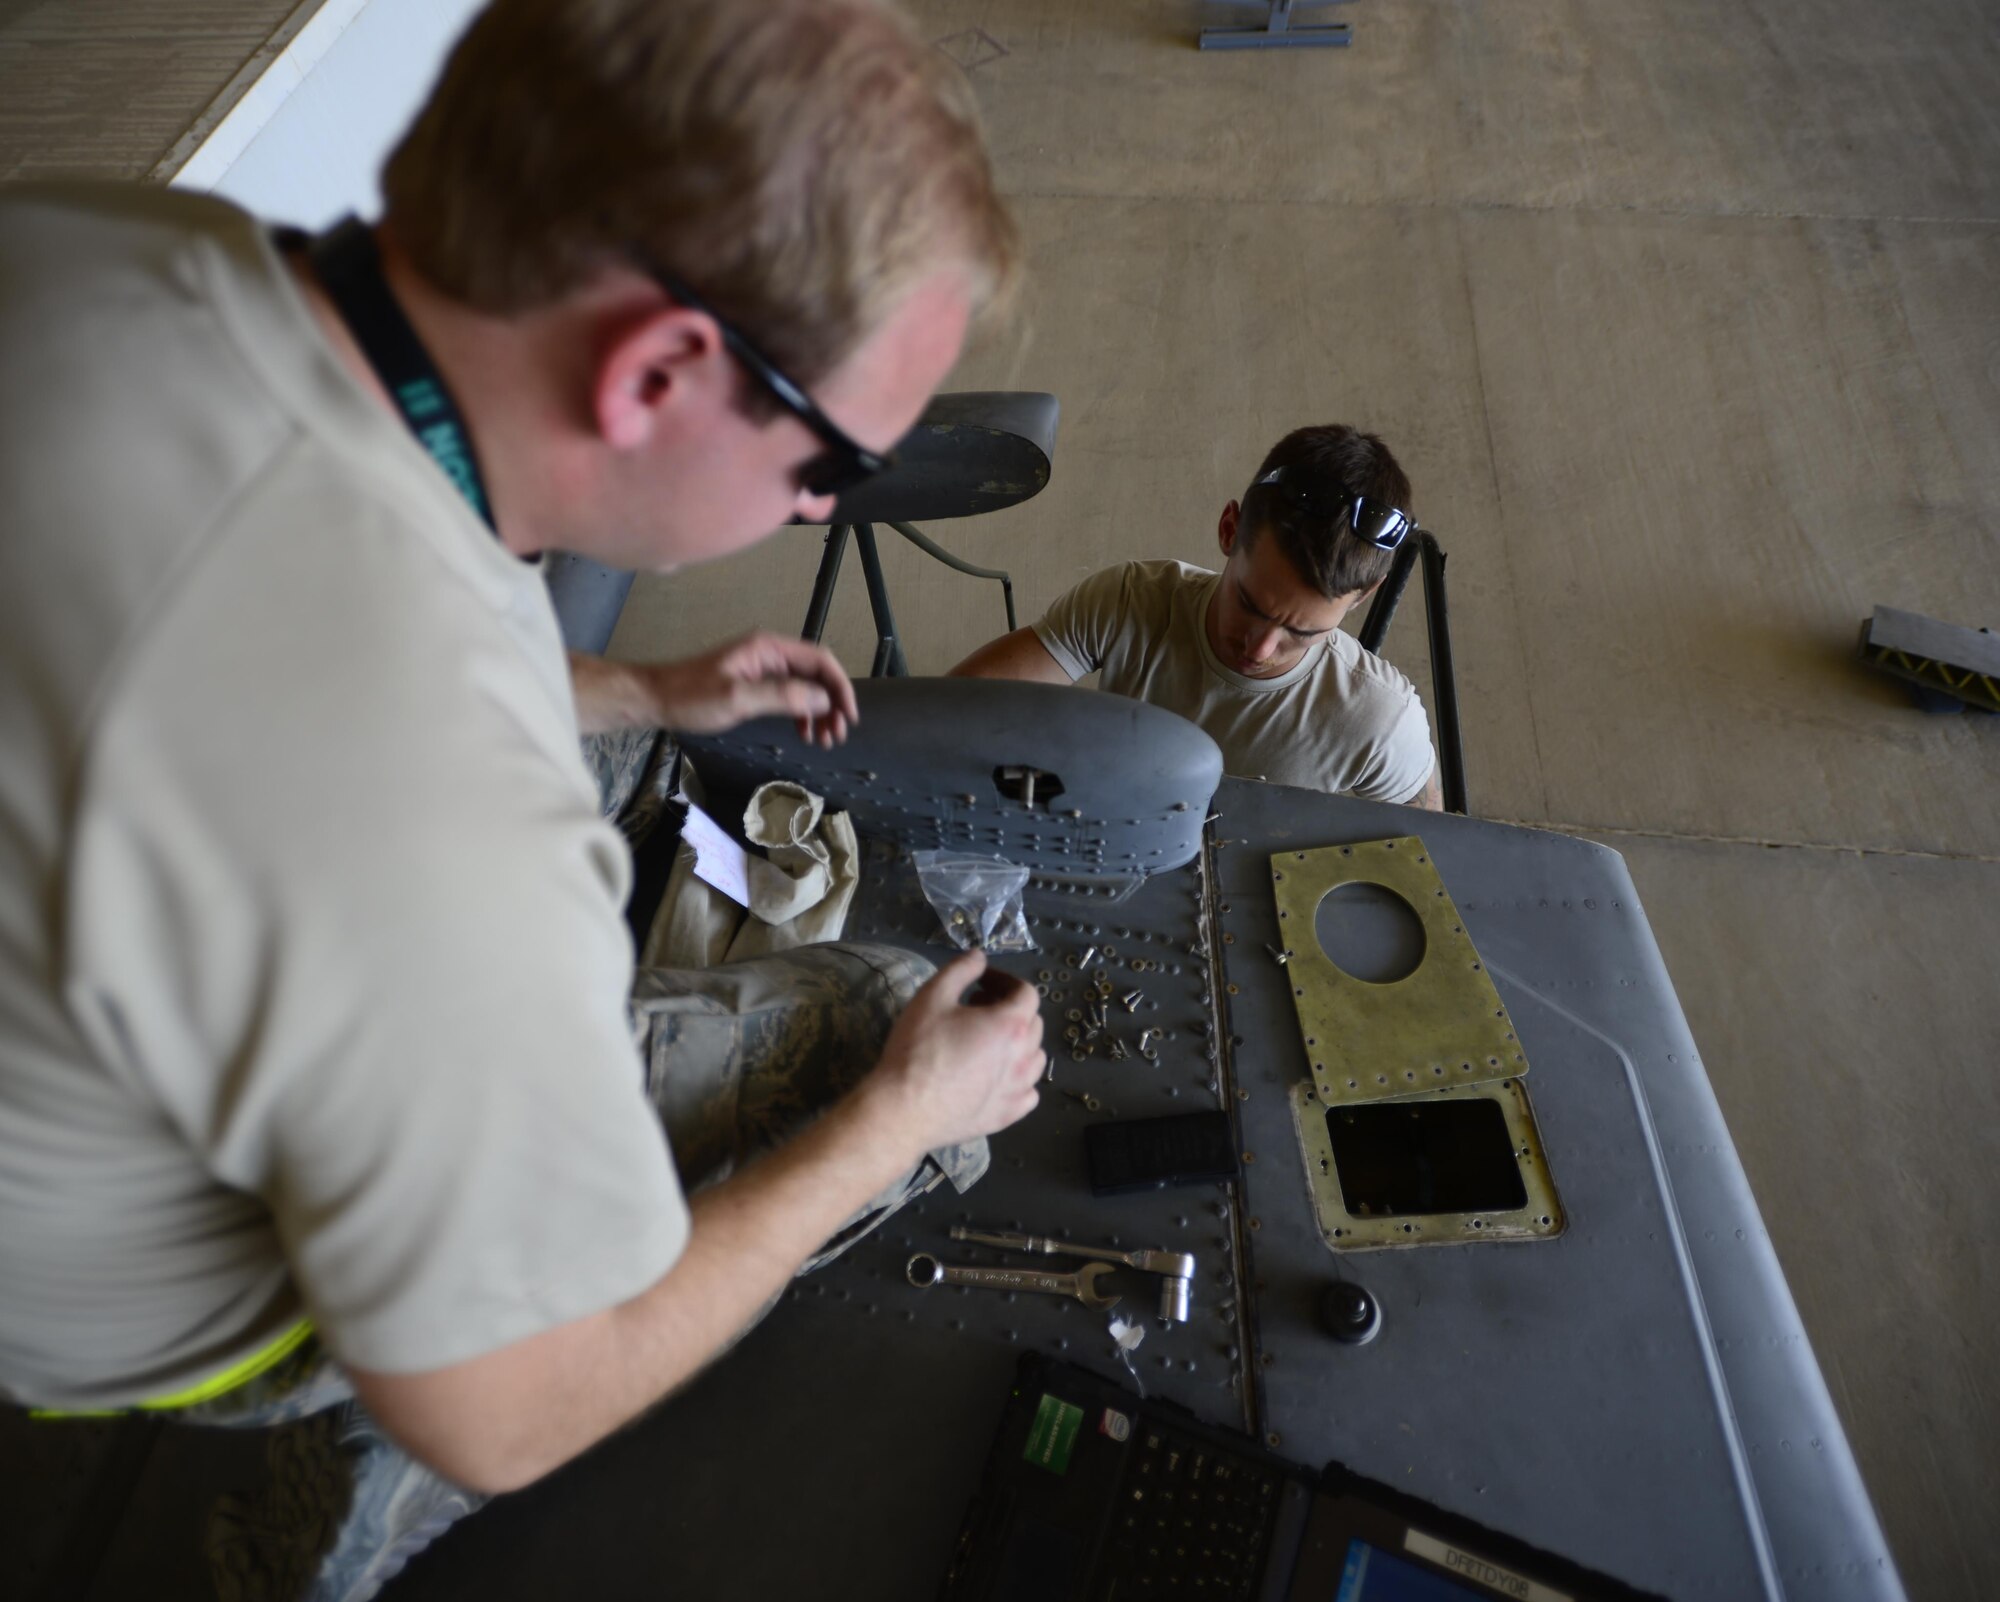 U.S. Air Force Staff Sgt. Sean Jones, 386th Expeditionary Aircraft Maintenance Squadron aerospace maintenance craftsman, sorts through parts for Senior Airman Christopher Lamb, 386th Expeditionary Aircraft Maintenance Squadron aerospace maintenance operator, at an undisclosed location in Southwest Asia, Sept. 25, 2015. After a home station inspection, EAMXS members changed a propeller on a C-130 Hercules aircraft to ensure mission effectiveness during Operation Inherent Resolve. (U.S. Air Force photo by Staff Sgt. Tyler Alexander/Released)